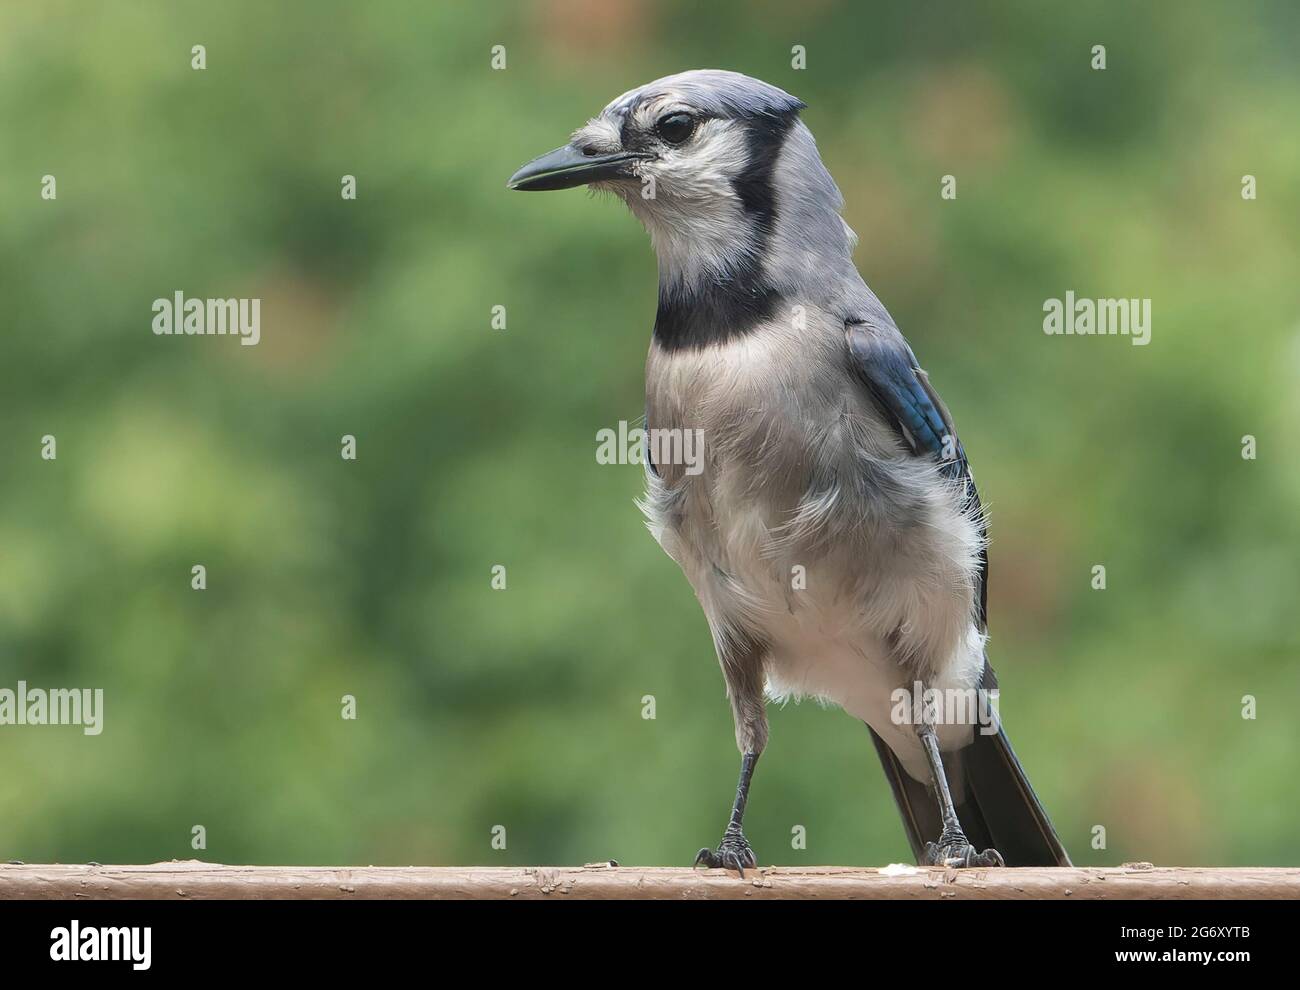 Bluejay paying attention to its surroundings on a backyard fountain Stock Photo